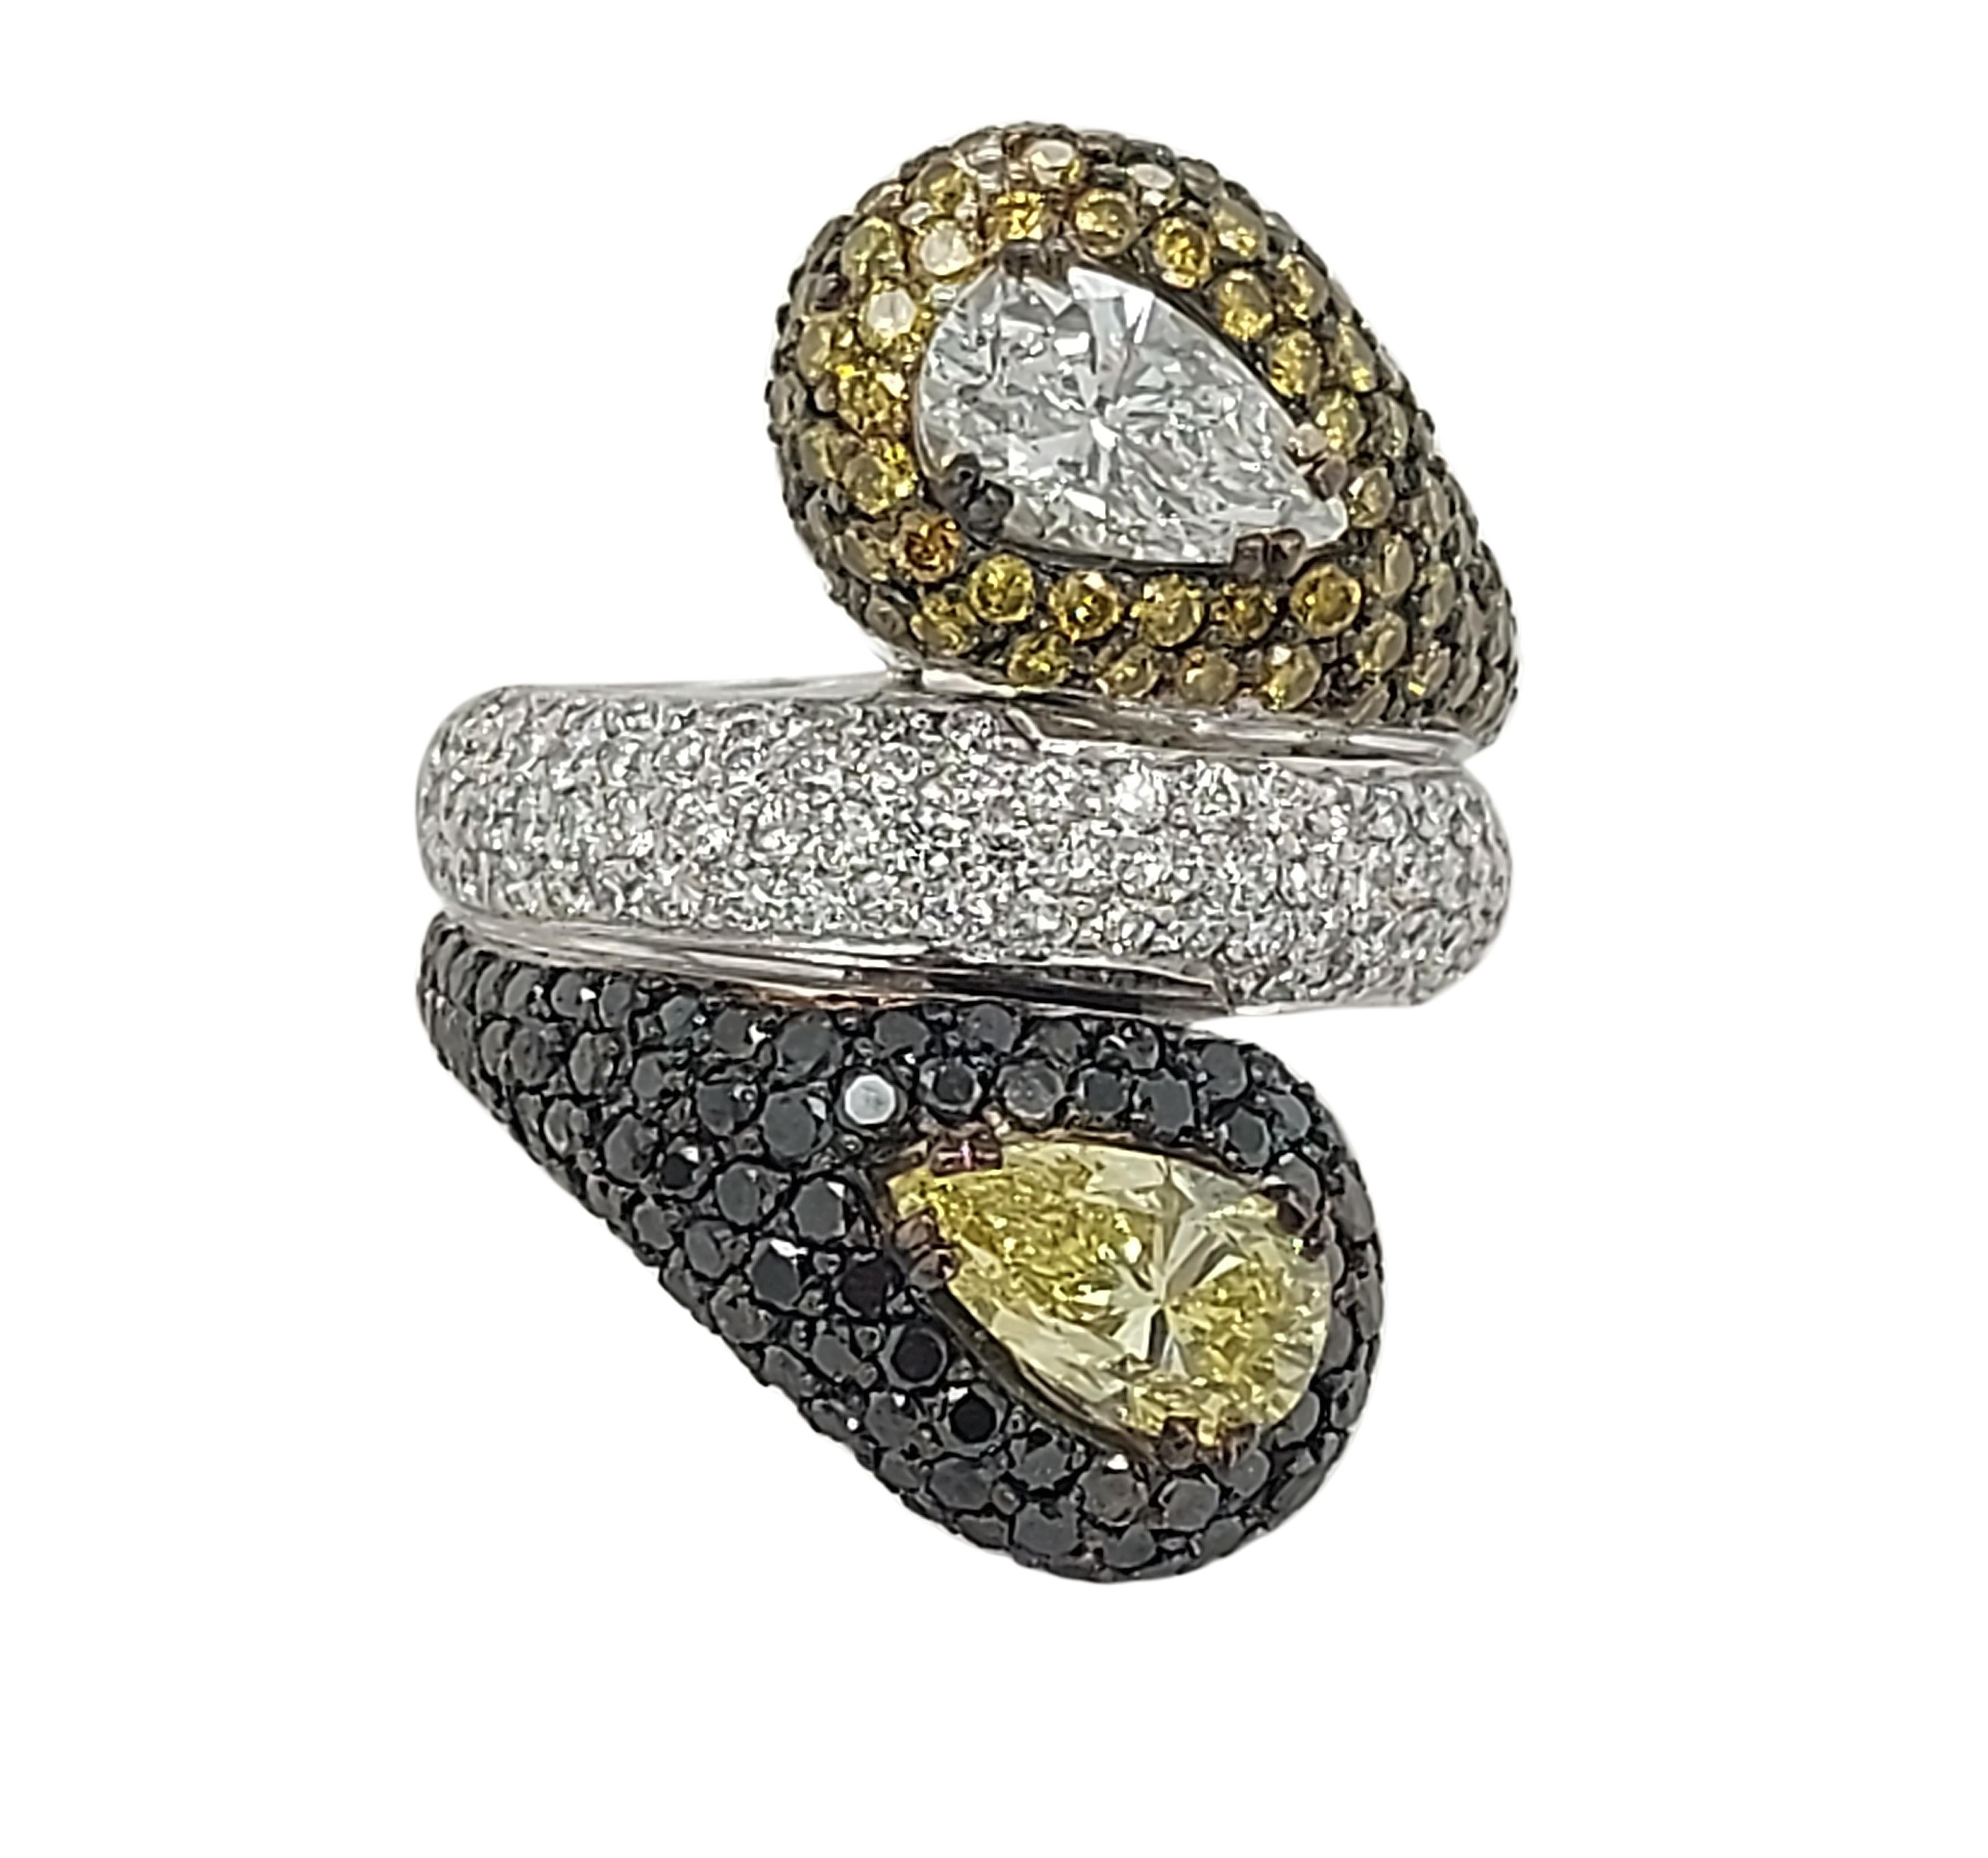  18 kt Gold Ring Diamonds Pears Yellow & White, Black & Cognac Diamonds

Exclusive and 1 of a kind ,made in our atelier in Antwerp with our logo inside.

Diamonds: Ps 1.24 Ct Fancy Intense Yellow ,White PS 1.14 Ct E VS1 + circa 3.31 carat brilliant